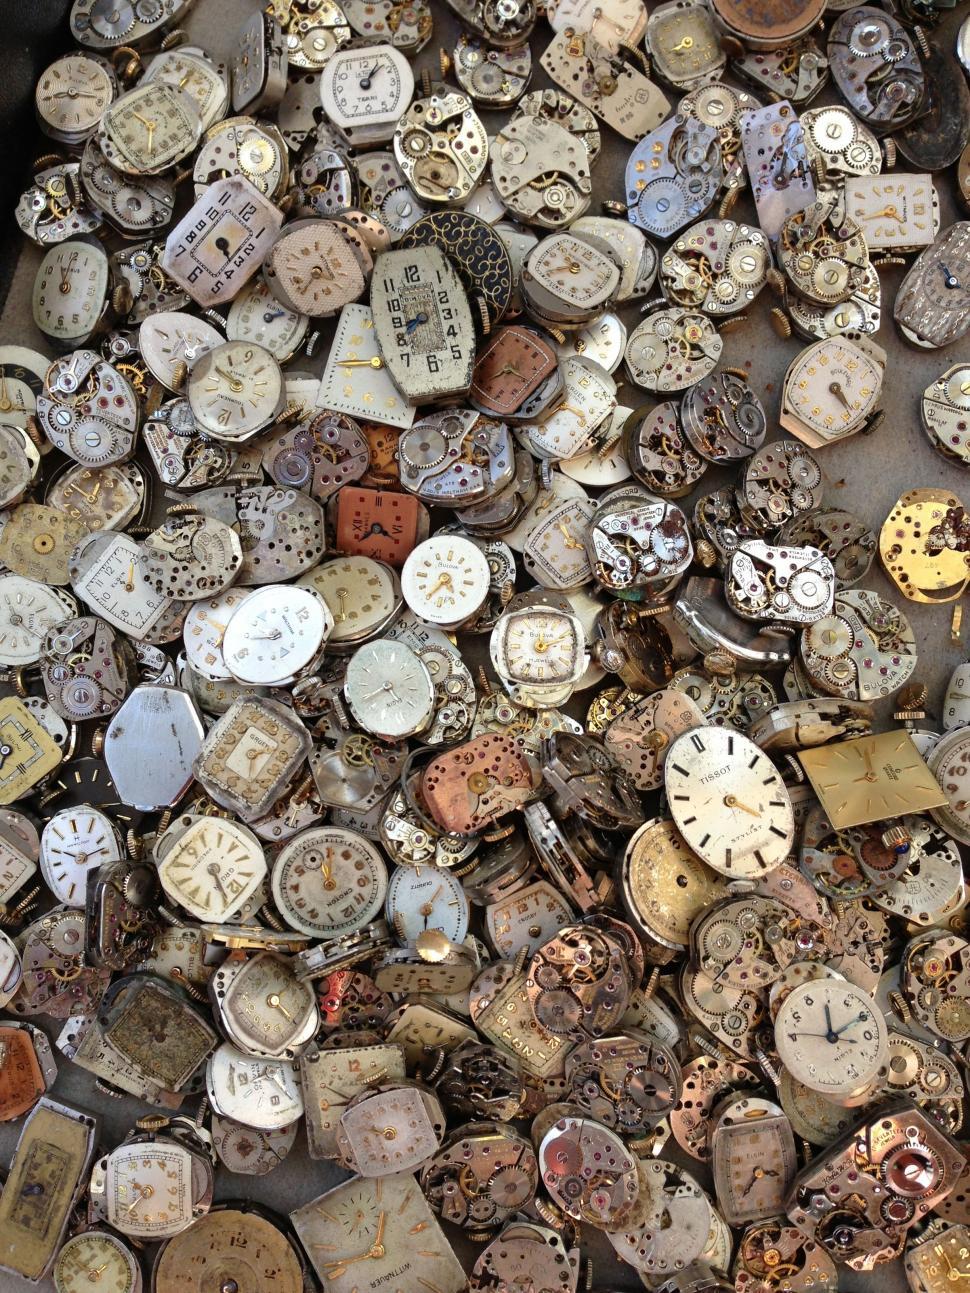 Free Image of A Pile of Old Clocks on a Table 